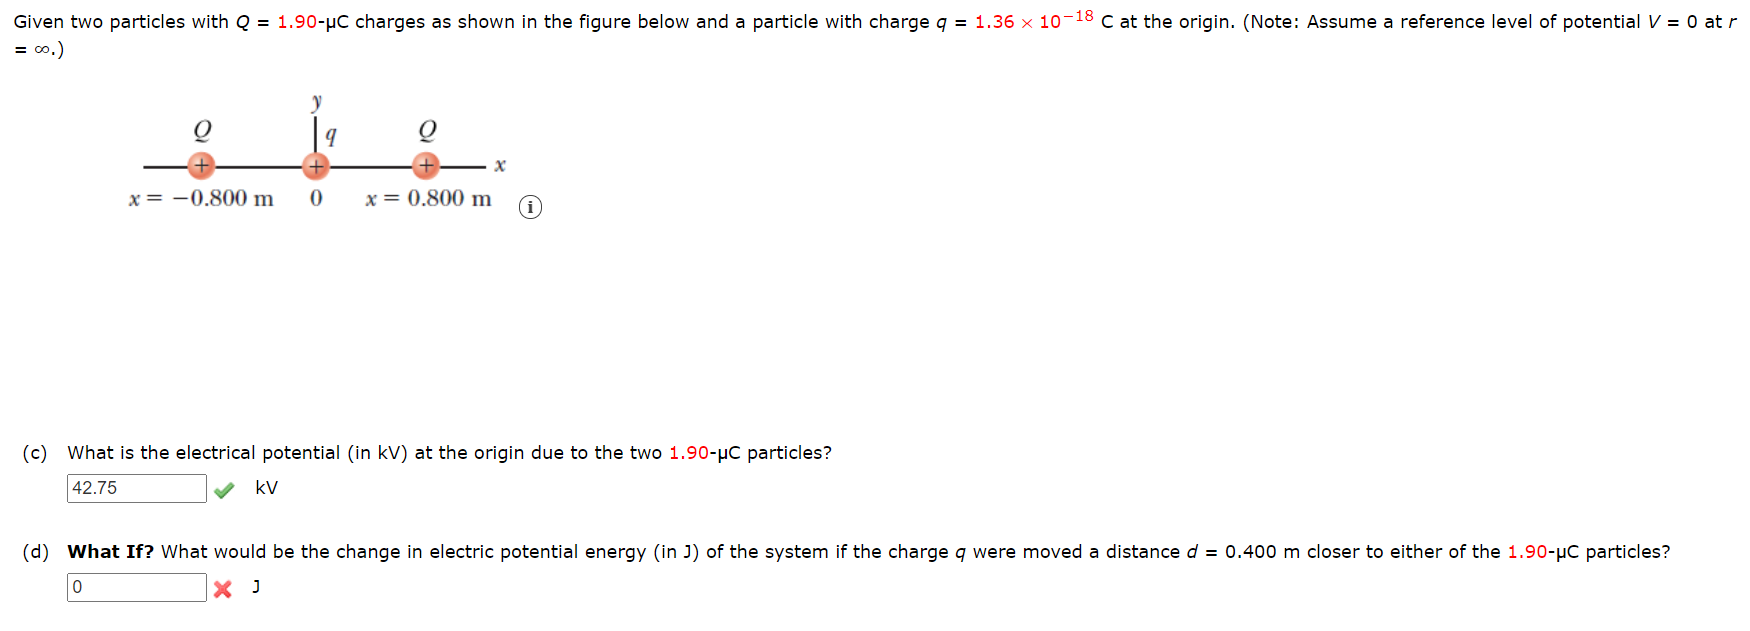 ### Problem Statement

Given two particles with \( Q = 1.90 \, \mu C \) charges as shown in the figure below, and a particle with charge \( q = 1.36 \times 10^{-18} \, C \) at the origin. (Note: Assume a reference level of potential \( V = 0 \) at \( r = \infty \)).

[Figure]
- The figure shows a horizontal line representing the x-axis.
- Two positive charges \( Q \) are located at positions \( x = -0.800 \, m \) and \( x = 0.800 \, m \) on the x-axis.
- A positive charge \( q \) is located at the origin (0,0).

### Questions

#### (c) What is the electrical potential (in kV) at the origin due to the two \( 1.90 \, \mu C \) particles?

**Answer:** \( 42.75 \, \text{kV} \)  ✔

\[
\boxed{42.75 \, \text{kV}}
\]

#### (d) What If? What would be the change in electric potential energy (in J) of the system if the charge \( q \) were moved a distance \( d = 0.400 \, m \) closer to either of the \( 1.90 \, \mu C \) particles?

**Answer:** \( 0 \, \text{J} \)  ✘

\[
\boxed{0 \, \text{J}}
\]